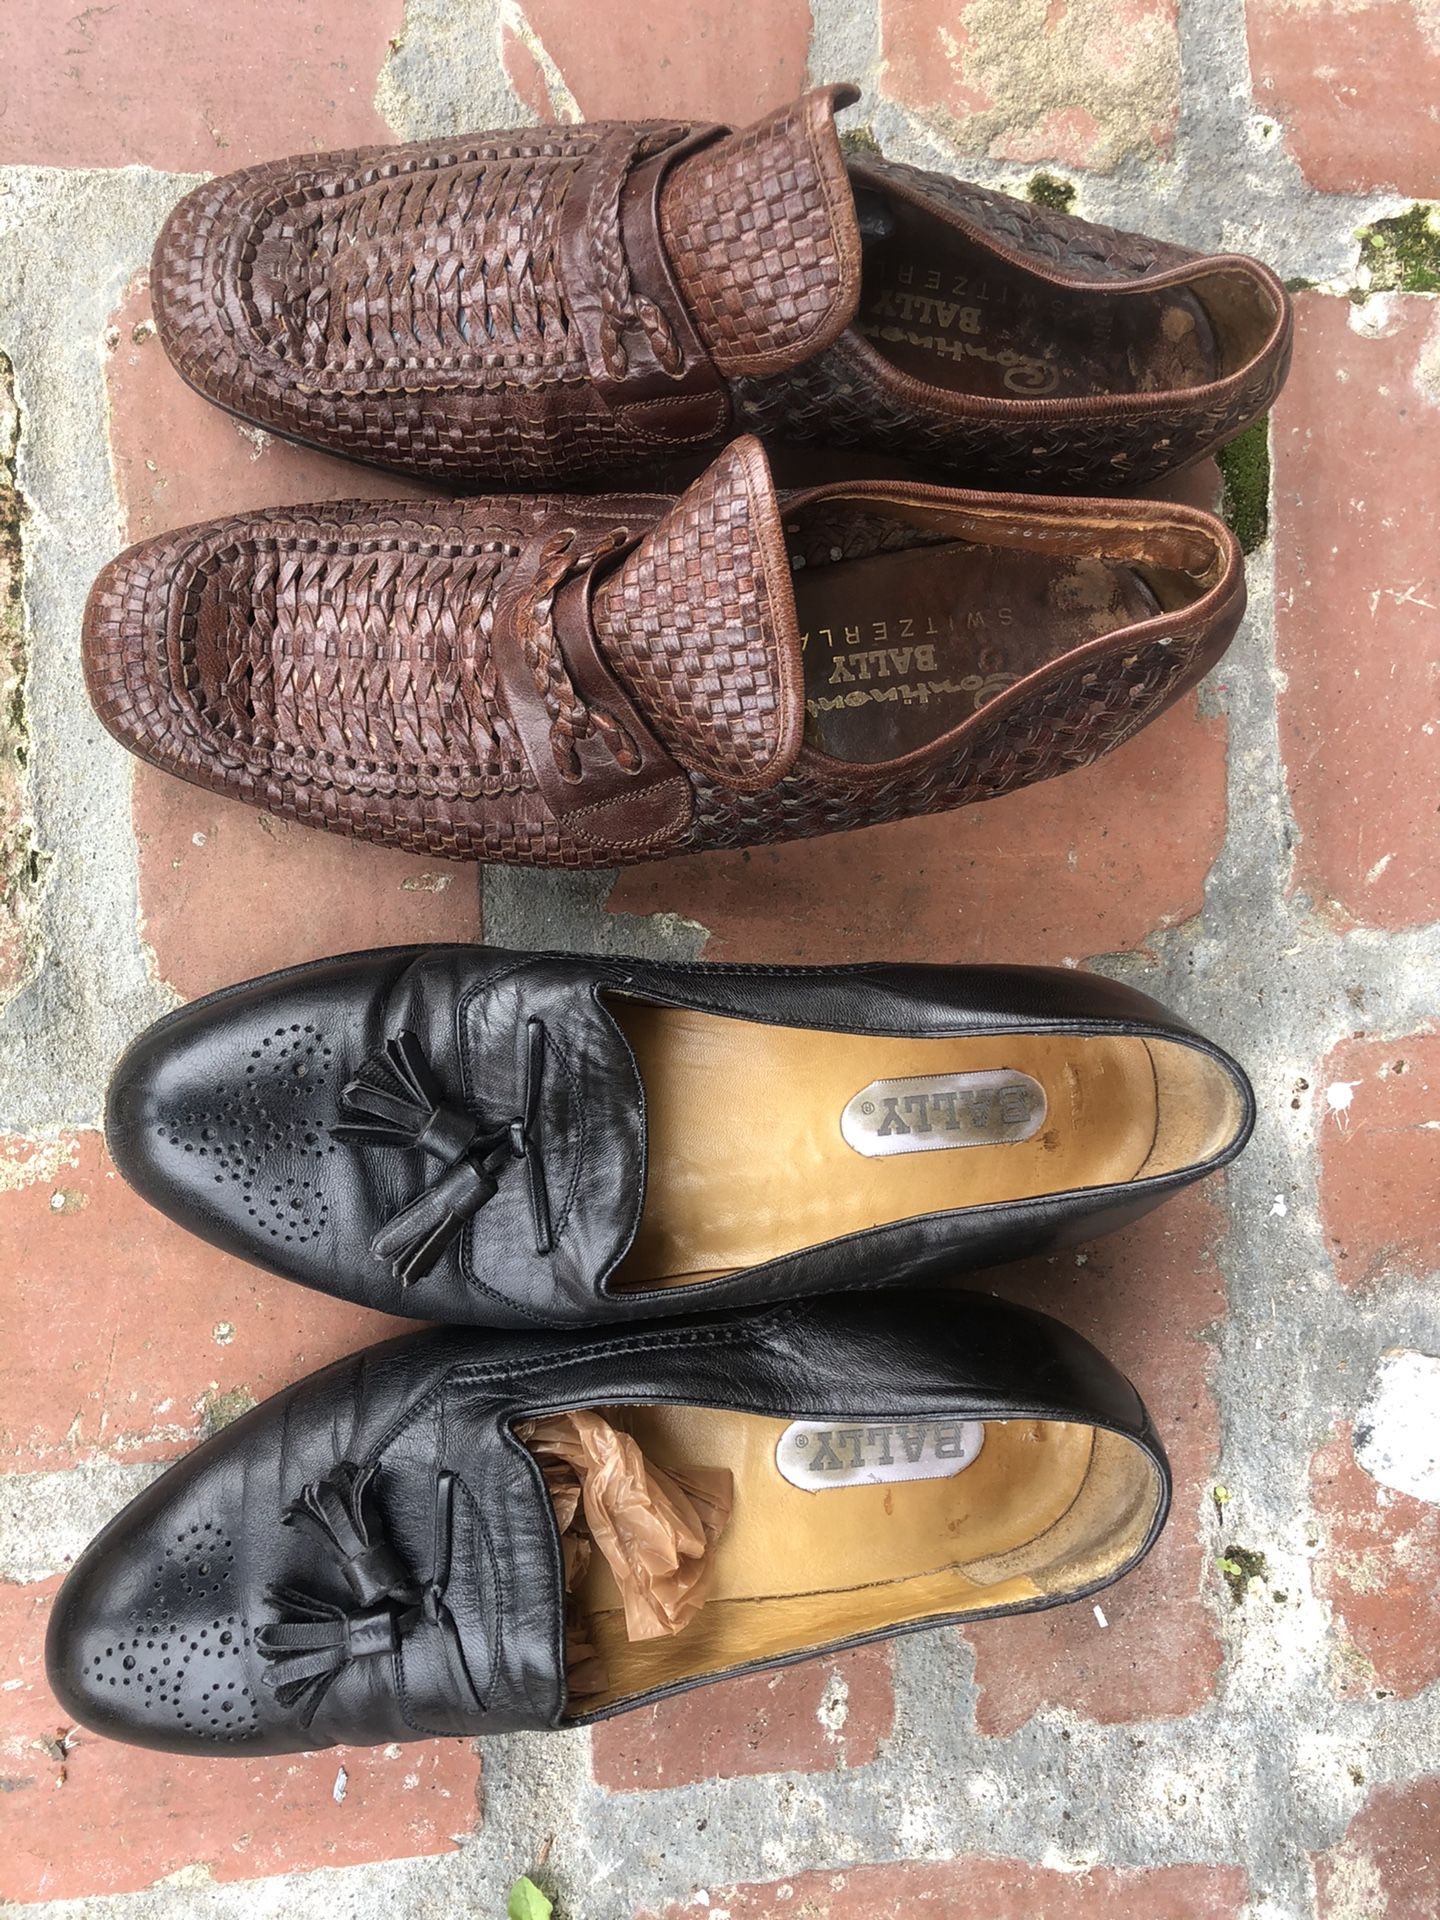 Gucci and bally vintage men’s loafers size 7.5 VARYING PRICES.